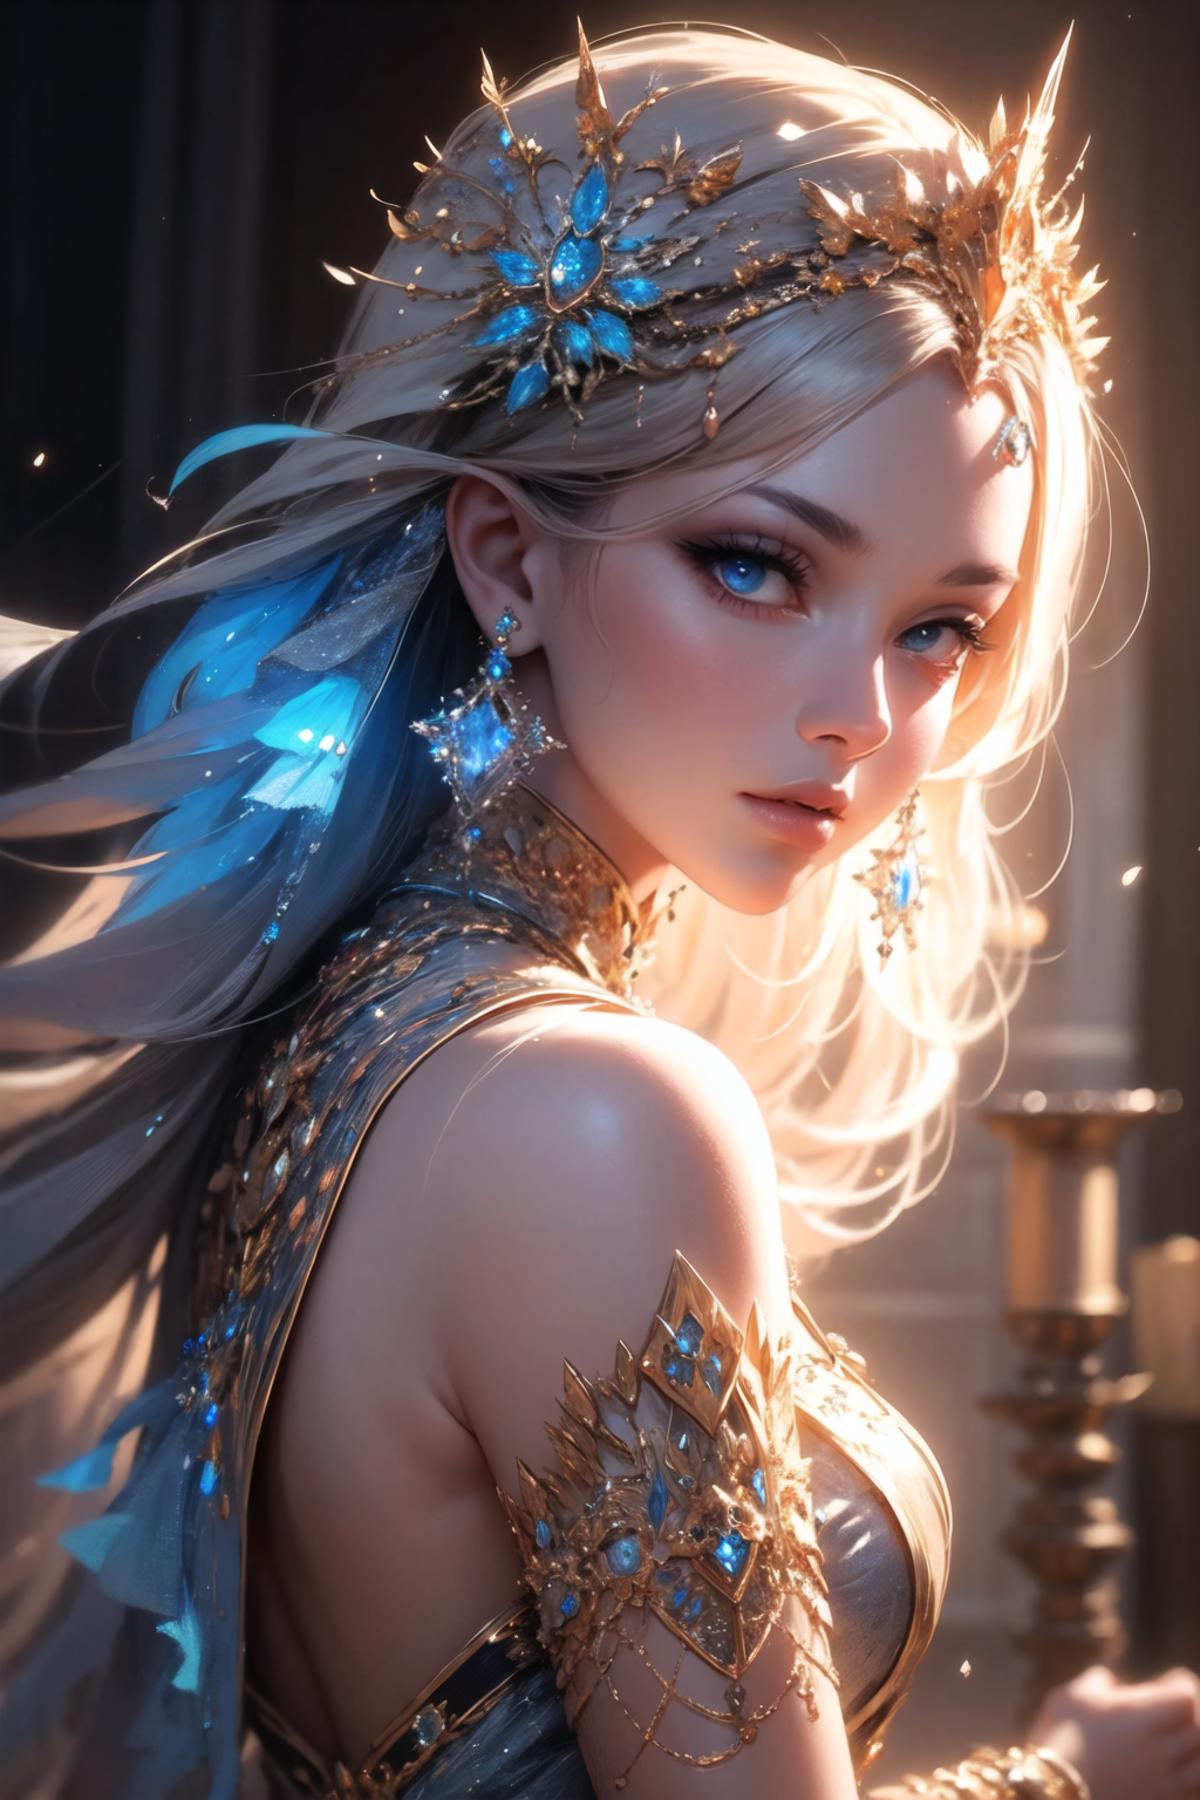 Blonde woman with blue eyes and blue hair wearing a gold and blue dress, earrings, and a crown.